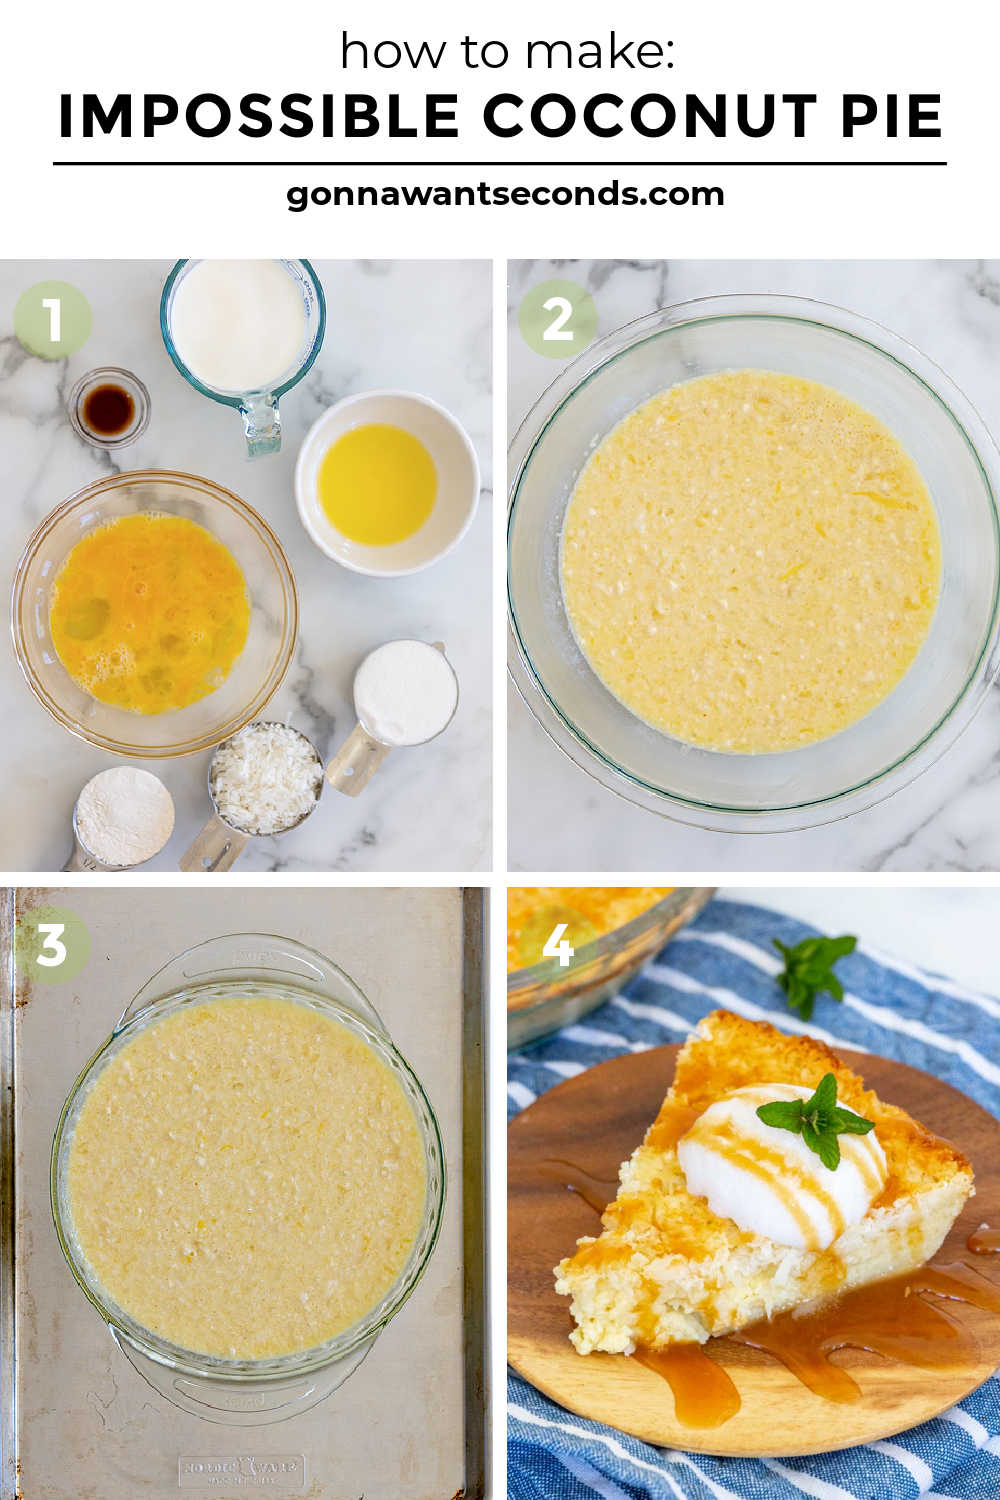 step by step how to make impossible coconut pie